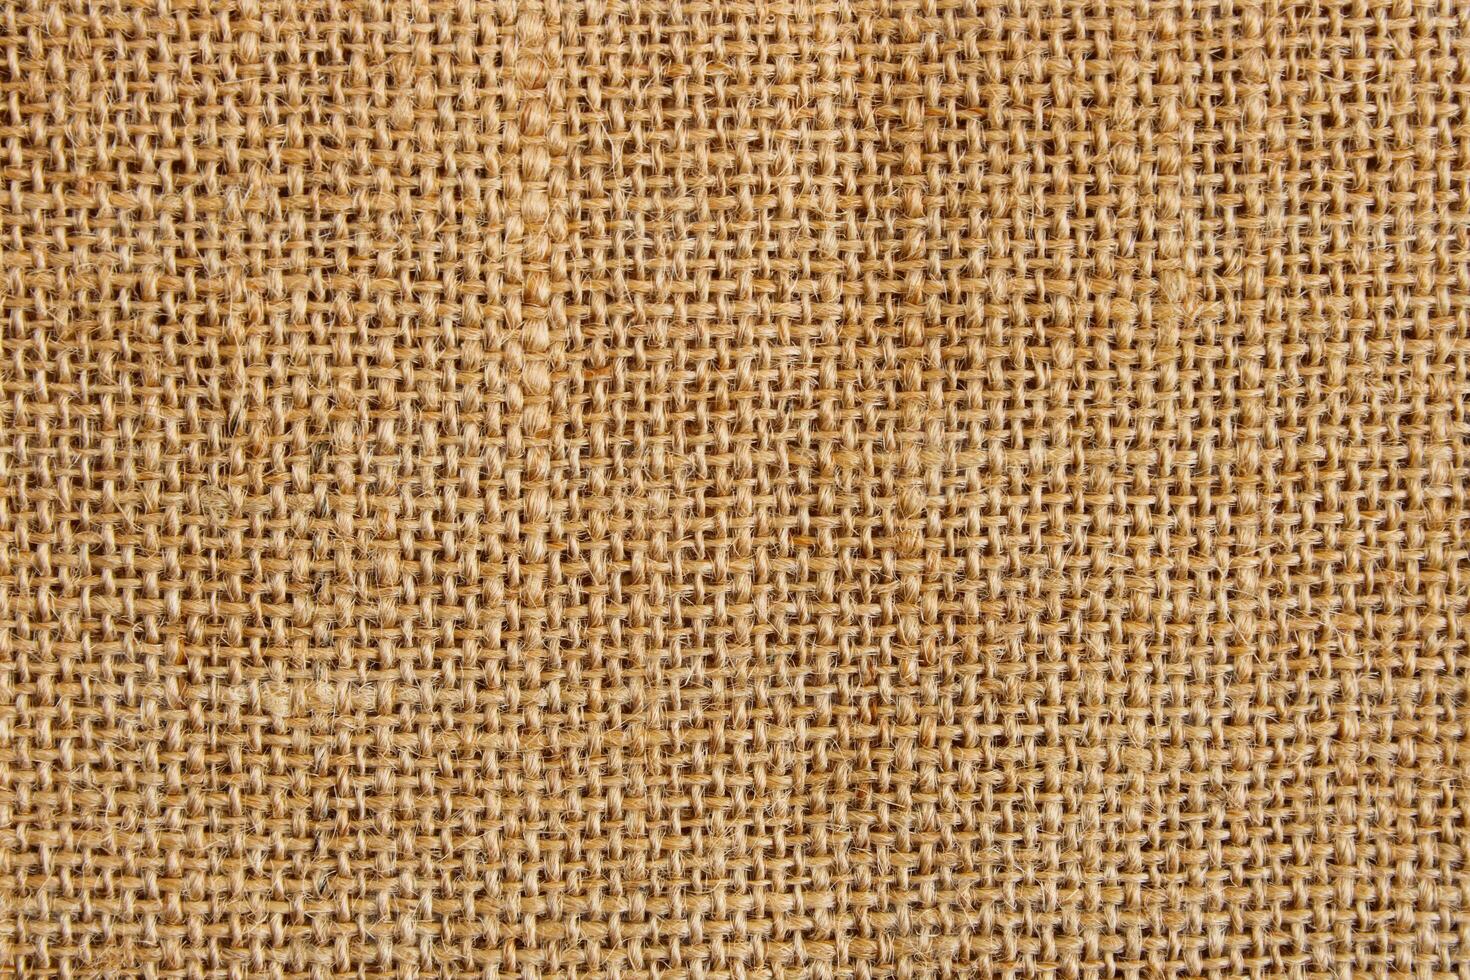 Brown Knitted Burlap Fabric Texture Material photo